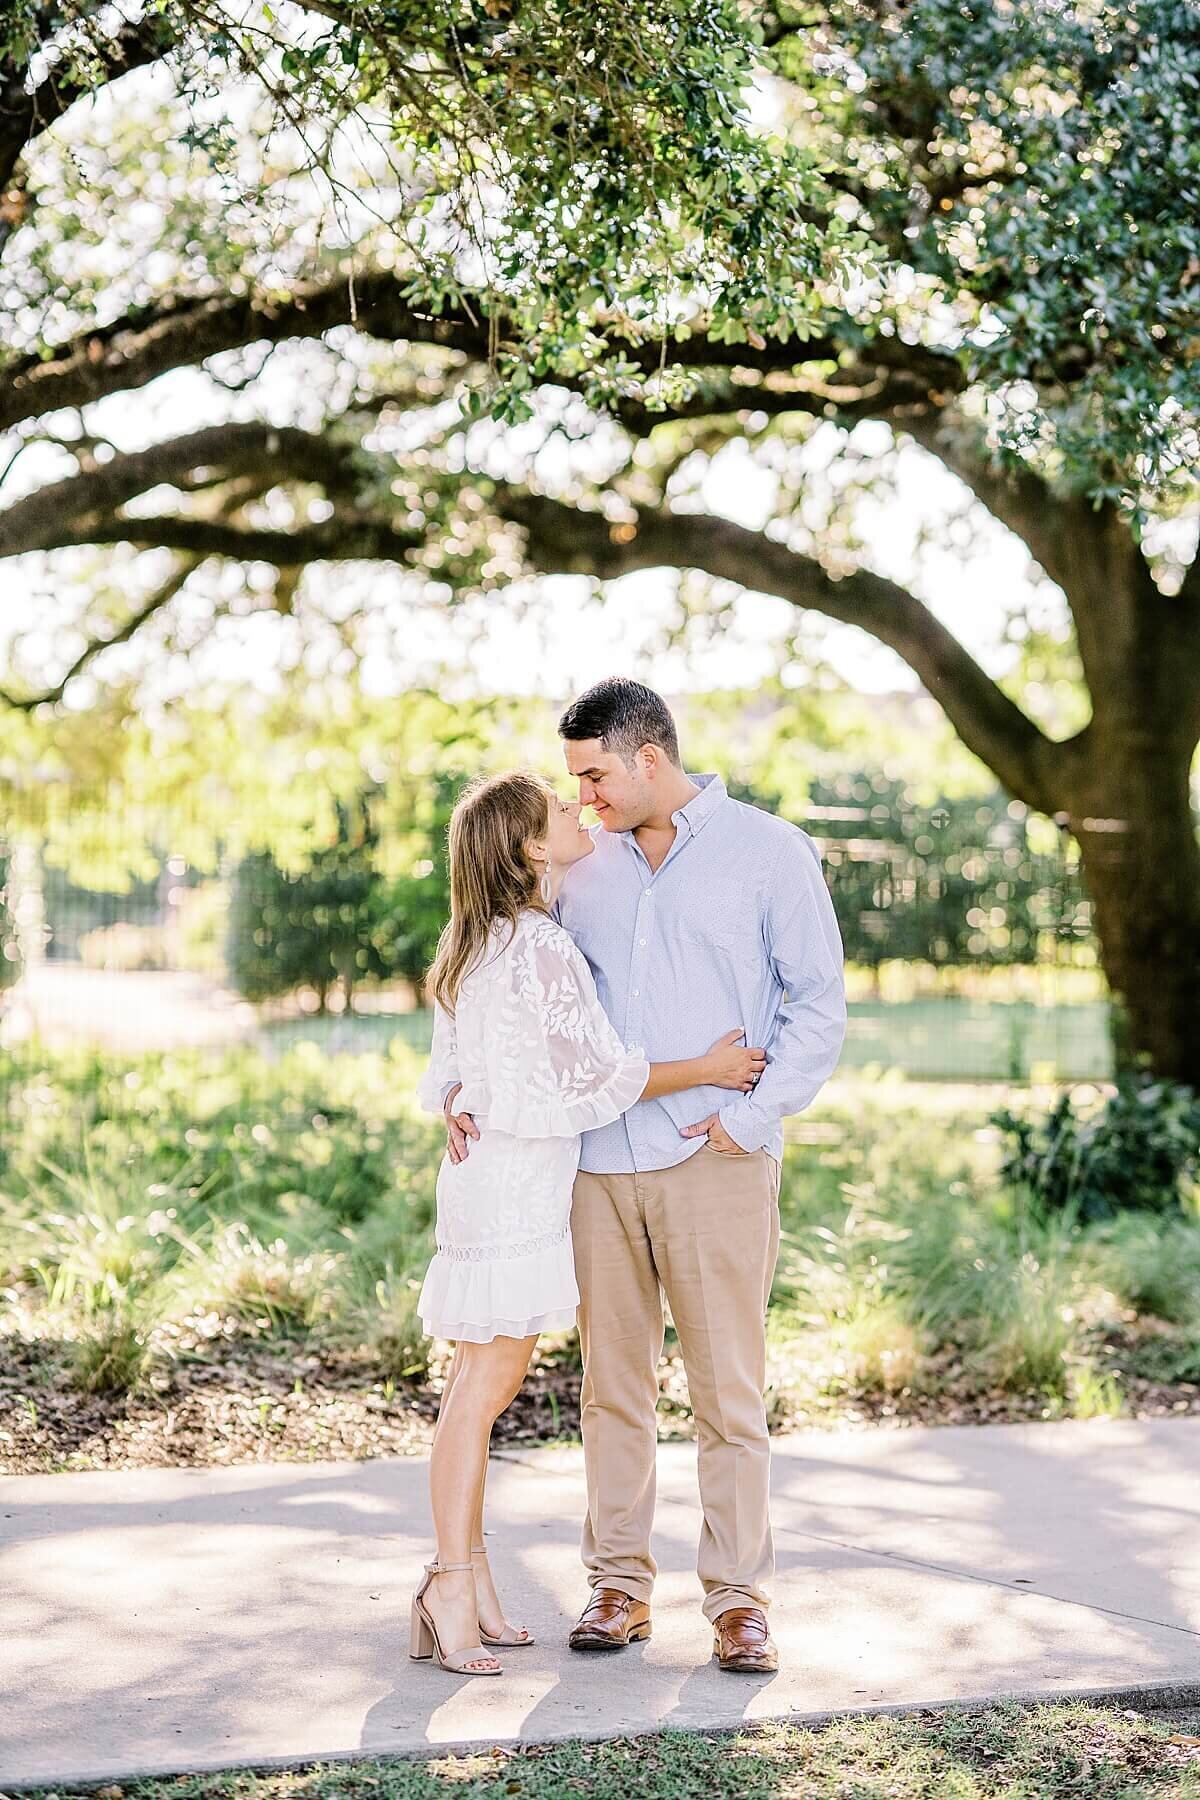 McGovern-Centennial-Gardens-Hermann-Park-Engagement-Session-Alicia-Yarrish-Photography_0042